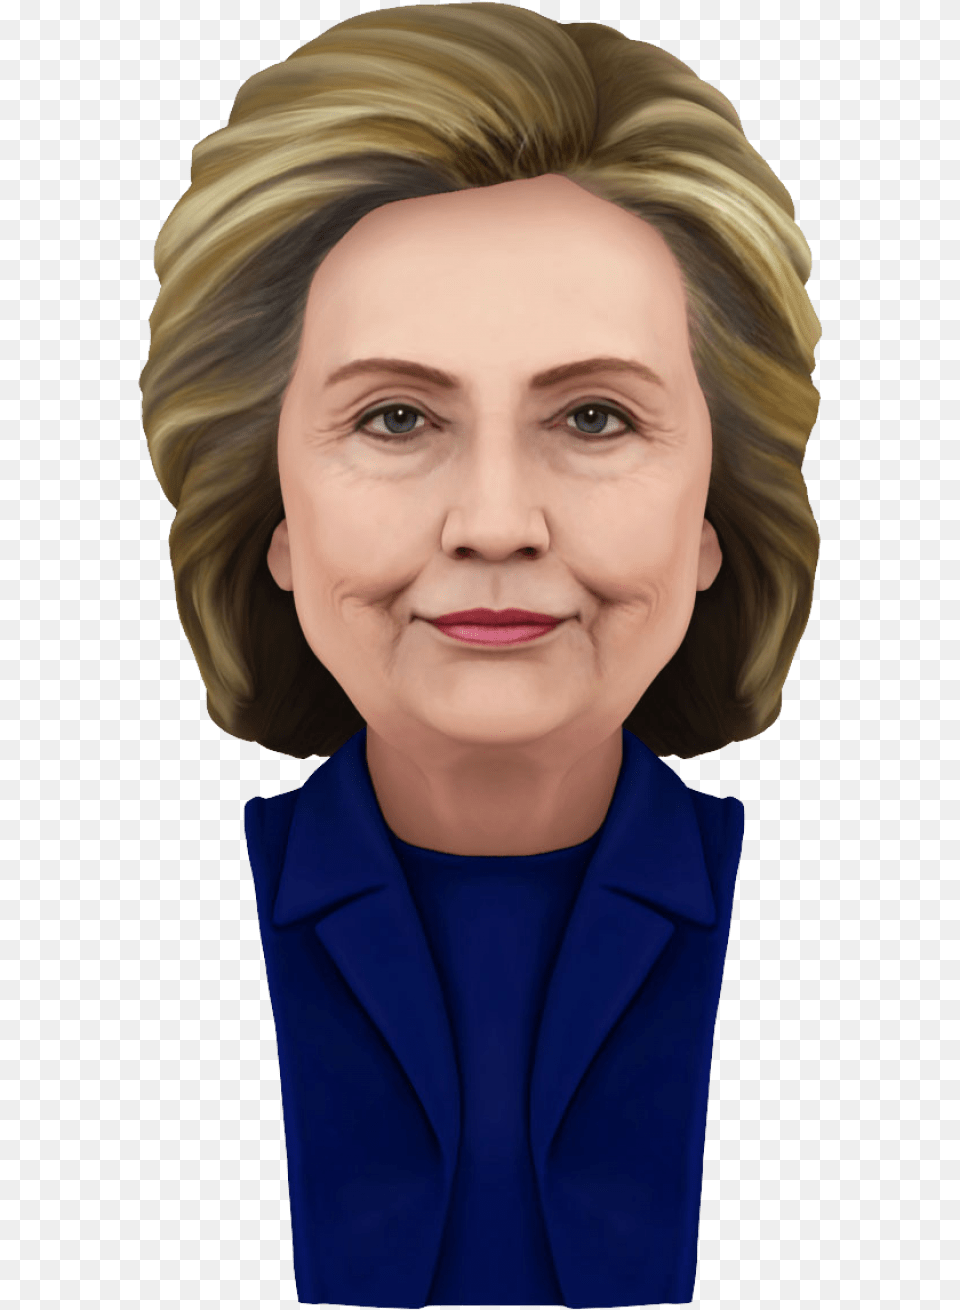 Hillary Clinton Image Hillary Crying Transparent Background, Adult, Smile, Portrait, Photography Png